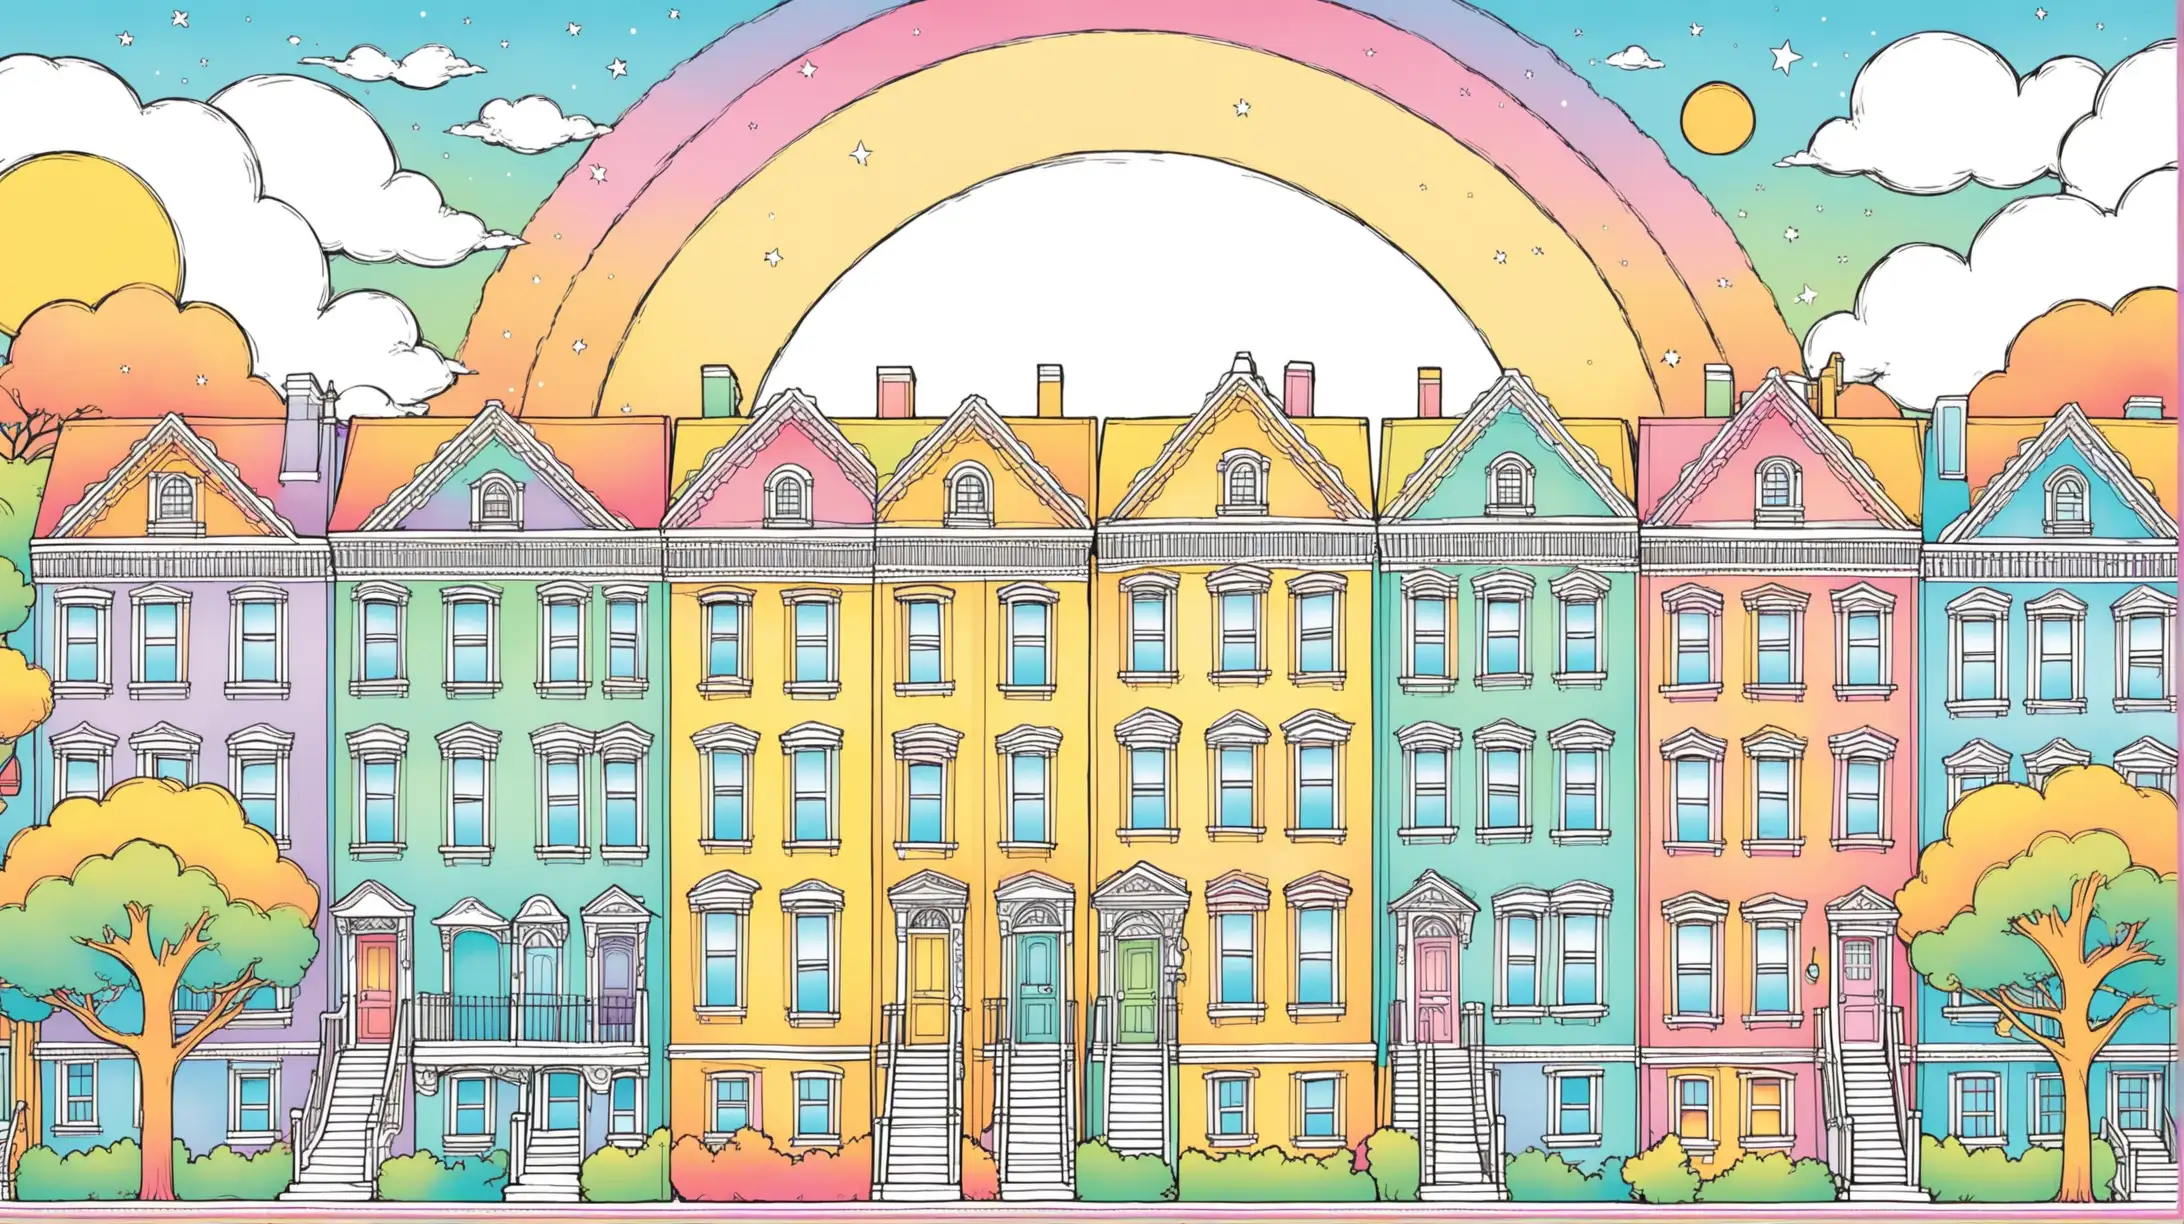 illustrated cover for a coloring book, colored in pastel palletes, new york city style townhouses aligned horizontally, each a different color palette, pretty trees and flowers line the block, Some houses are colored in perfectly while others are half colored in, inviting readers to fill in the blanks with their imagination, Above is a playful sky with a sun and some clouds, image serves as the perfect wrap for a whimsical coloring book for young adults, clean lines for makes sharp details.